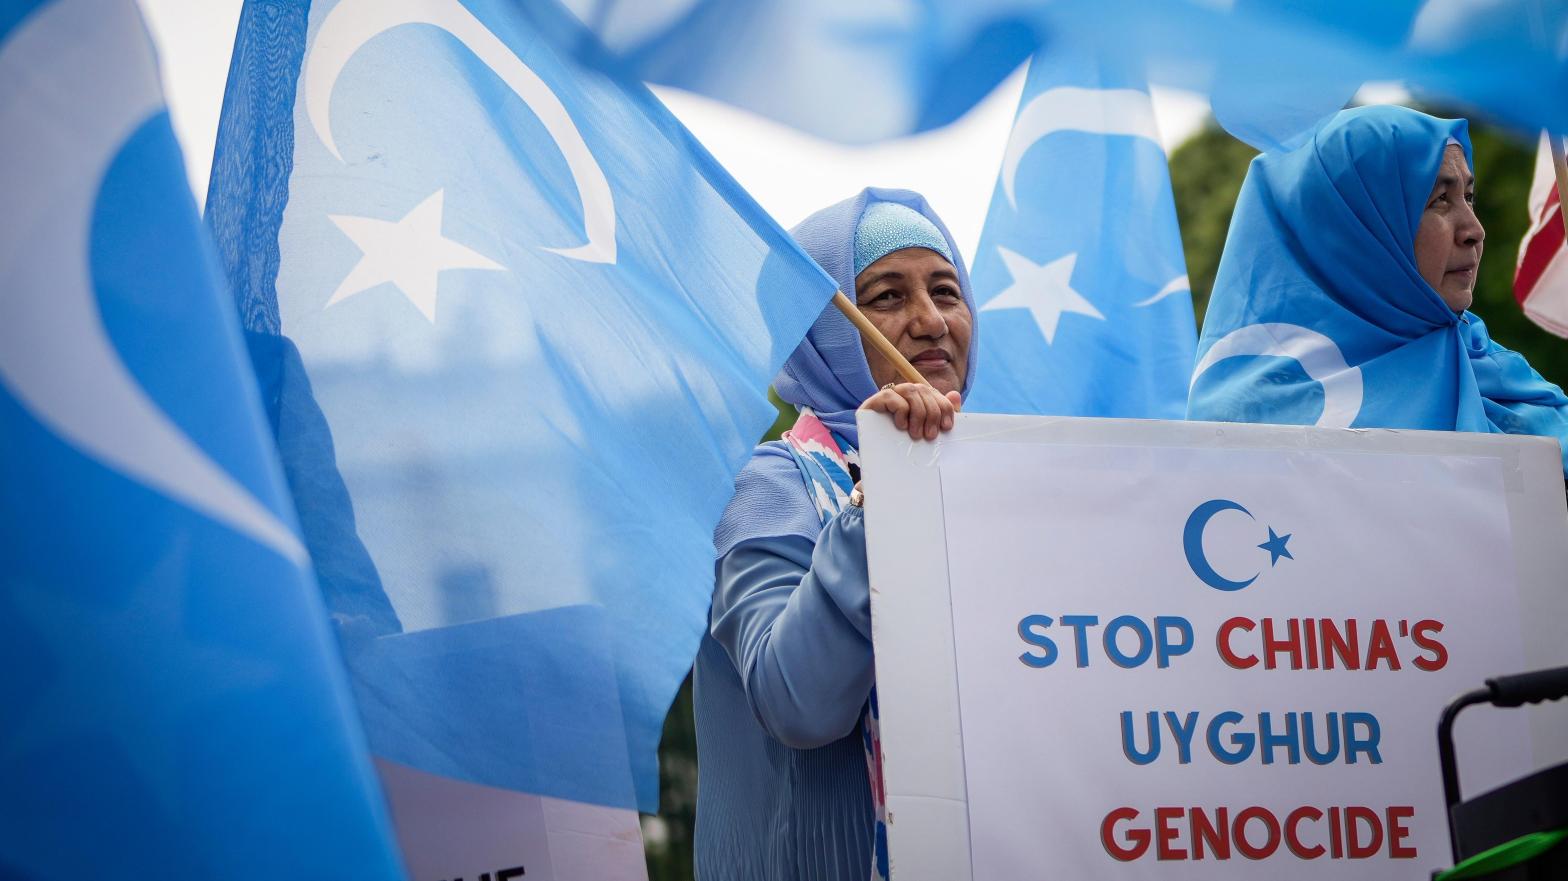 Activists rallied in Washington DC last July asking governments to recognise East Turkestan as an occupied country. The Uyghur population in the Chinese Xinjiang province have been subject to brutal repressive tactics from the Beijing government. (Photo: Drew Angerer, Getty Images)